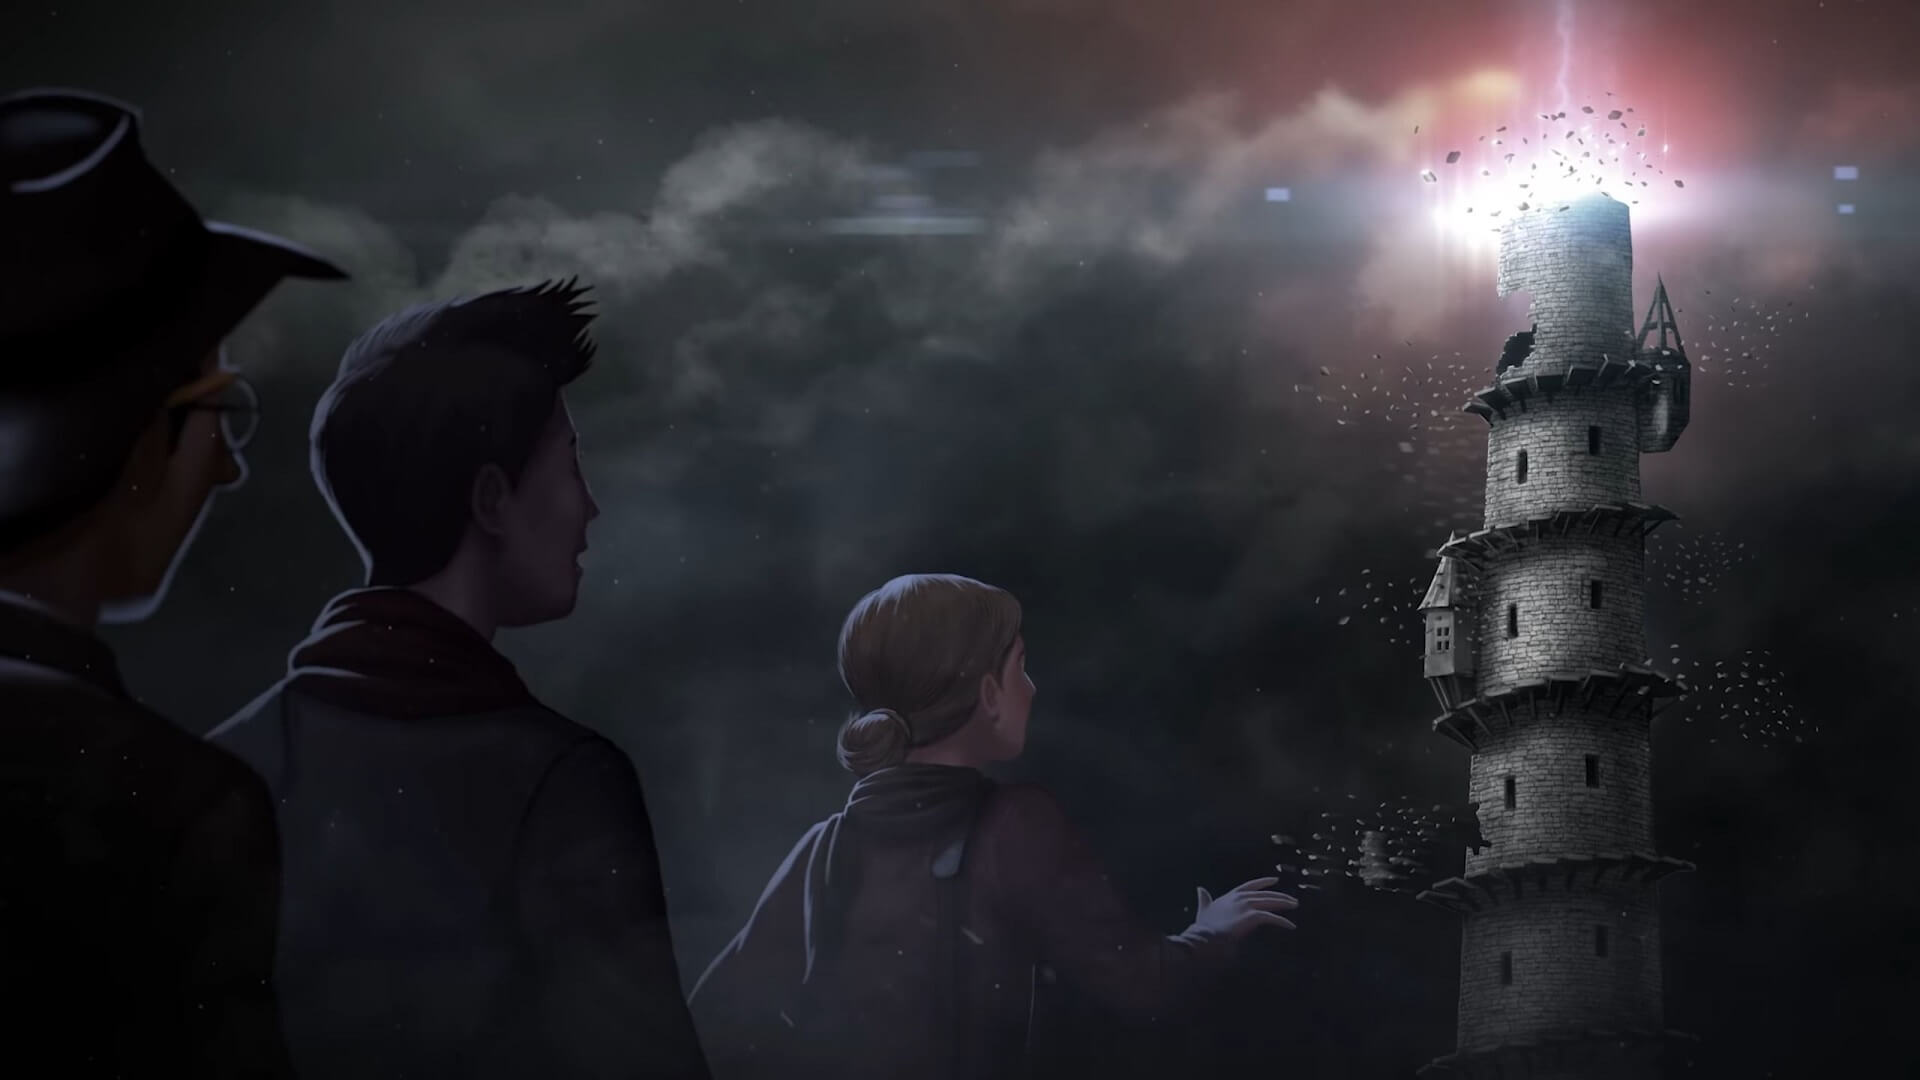 A group approaching The Observer's tower in Dead by Daylight